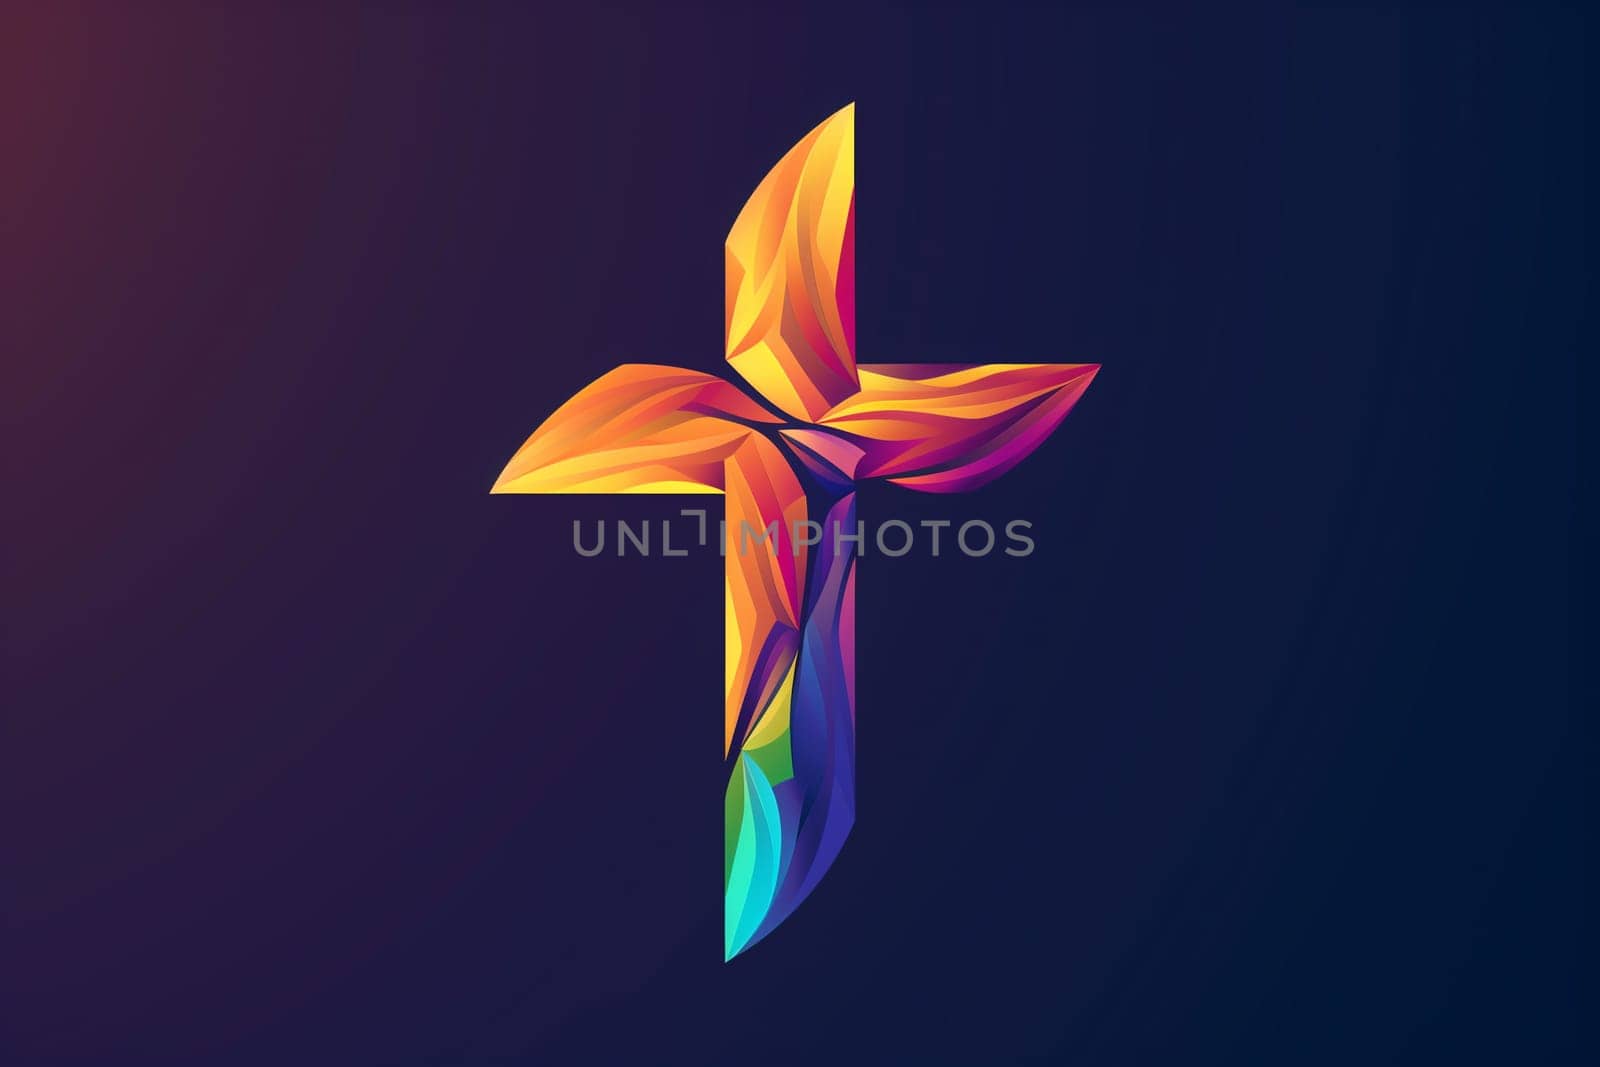 A vibrant cross stands out against a dark backdrop. The hues contrast sharply, creating a striking visual impact.